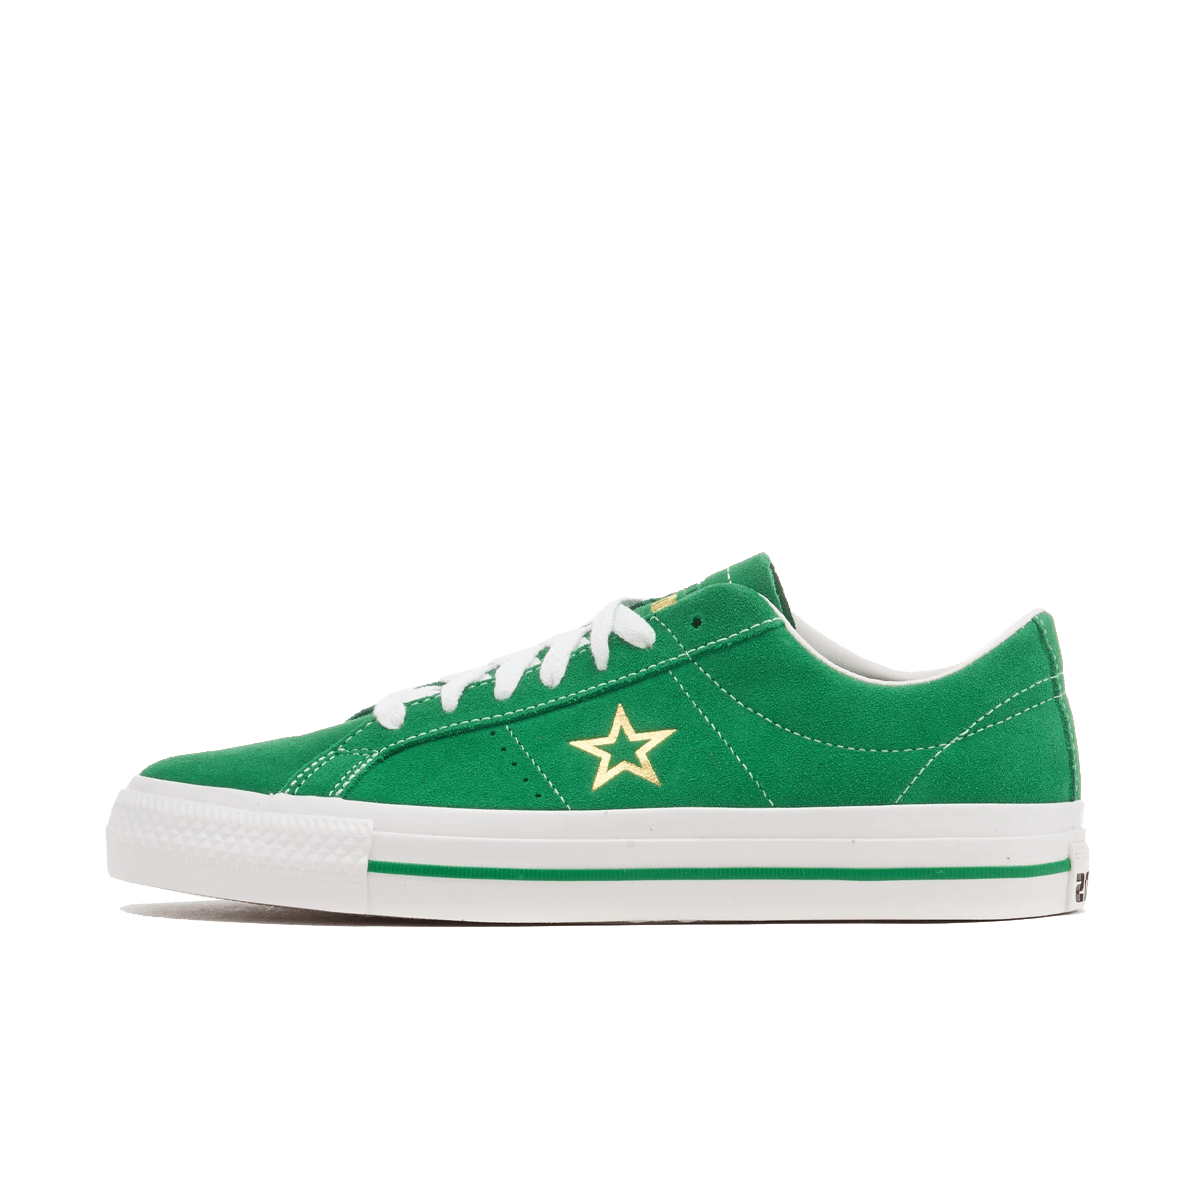 Converse One Star Pro OX 'Green' A06645C